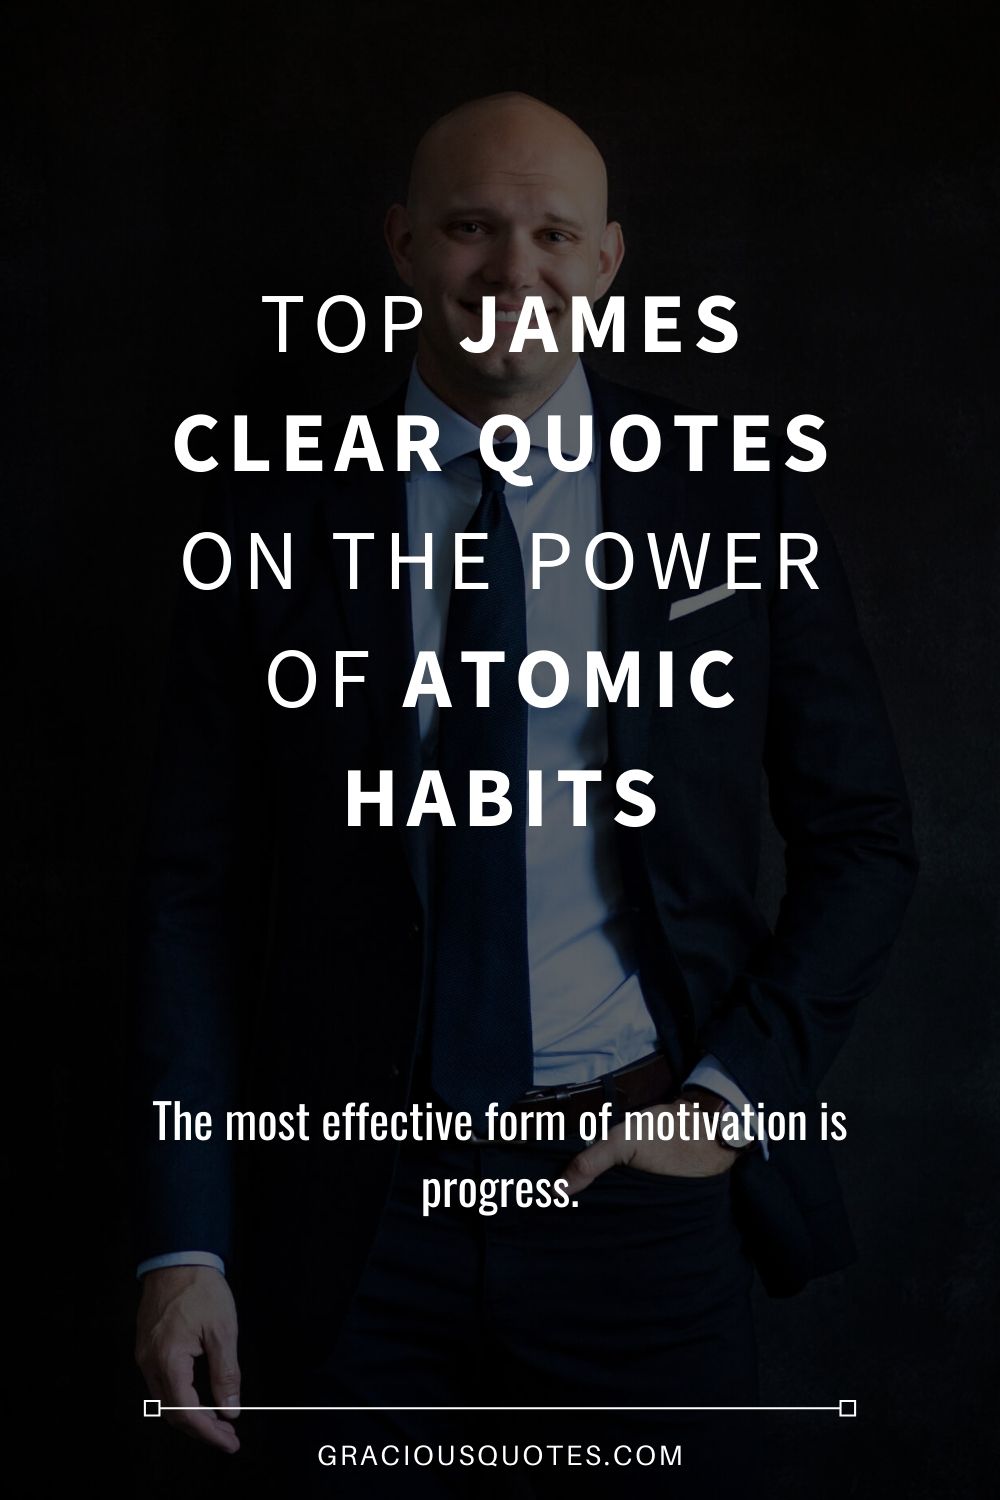 278-James-Clear-Quotes-on-the-Power-of-Atomic-Habits-Gracious-Quotes